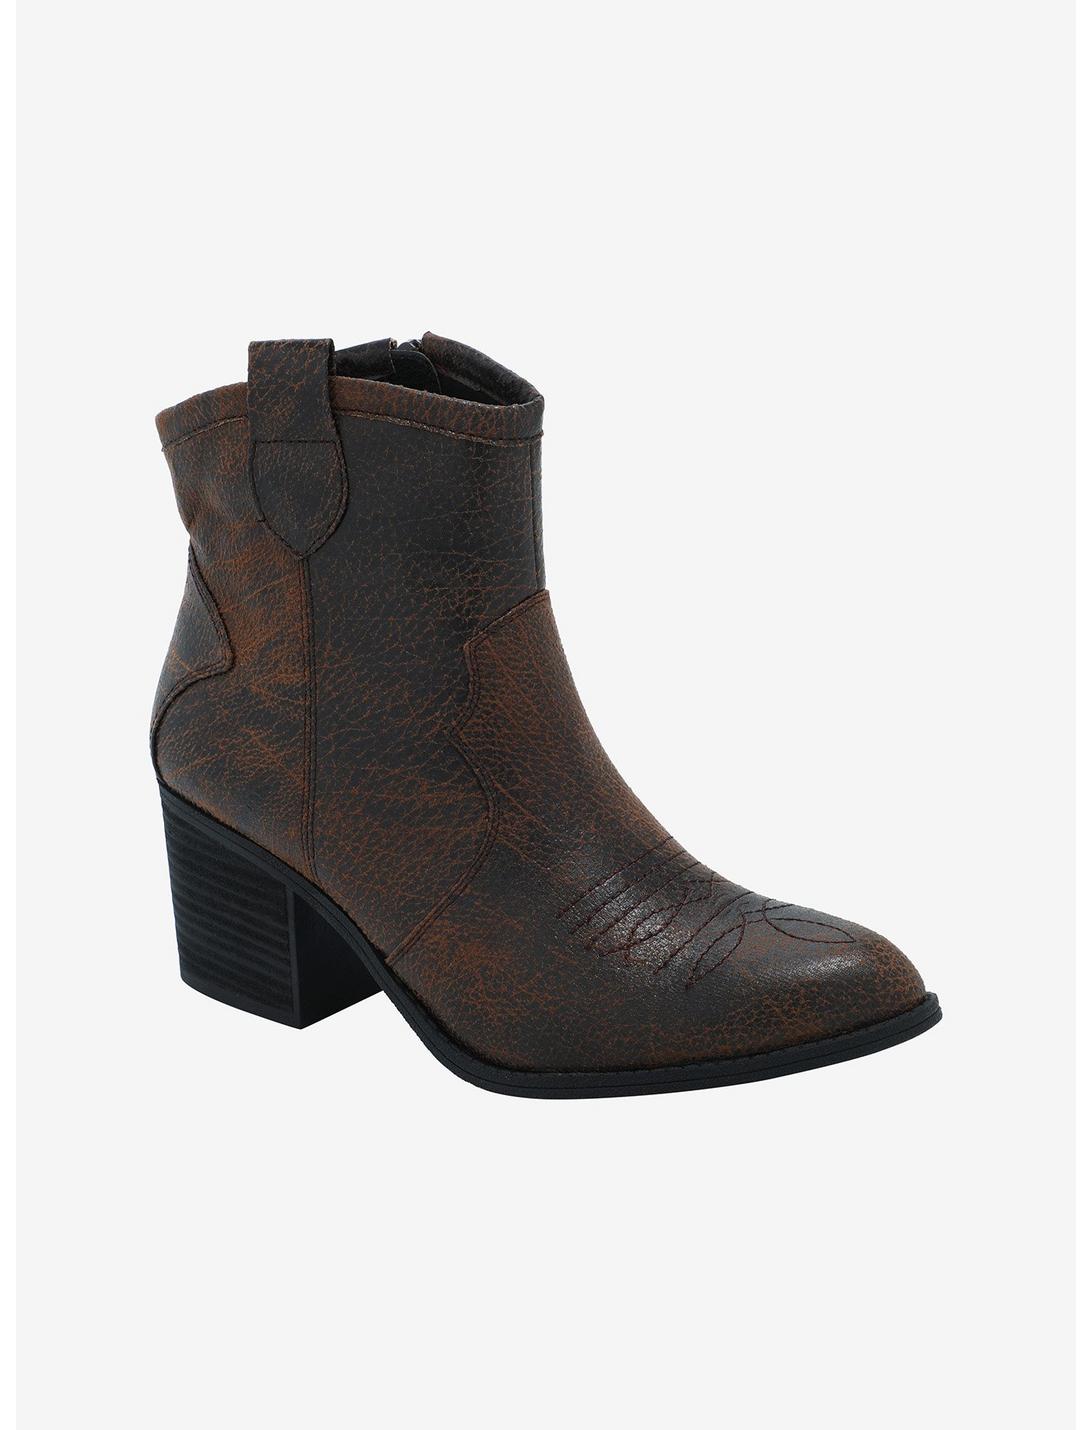 Dirty Laundry Brown Cowboy Ankle Boots, MULTI, hi-res